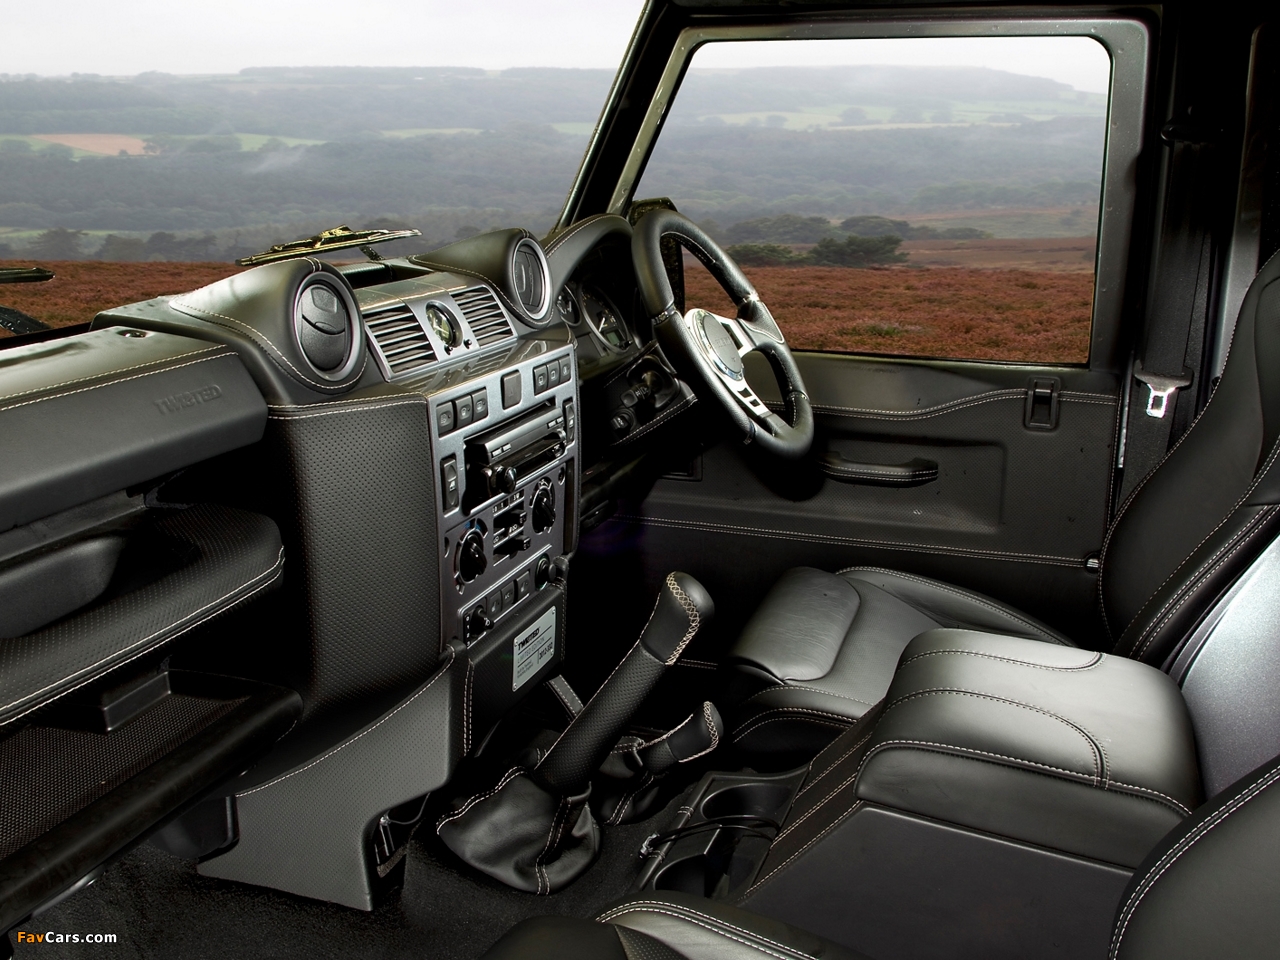 Twisted Land Rover Defender 110 Station Wagon French Edition 2012 images (1280 x 960)